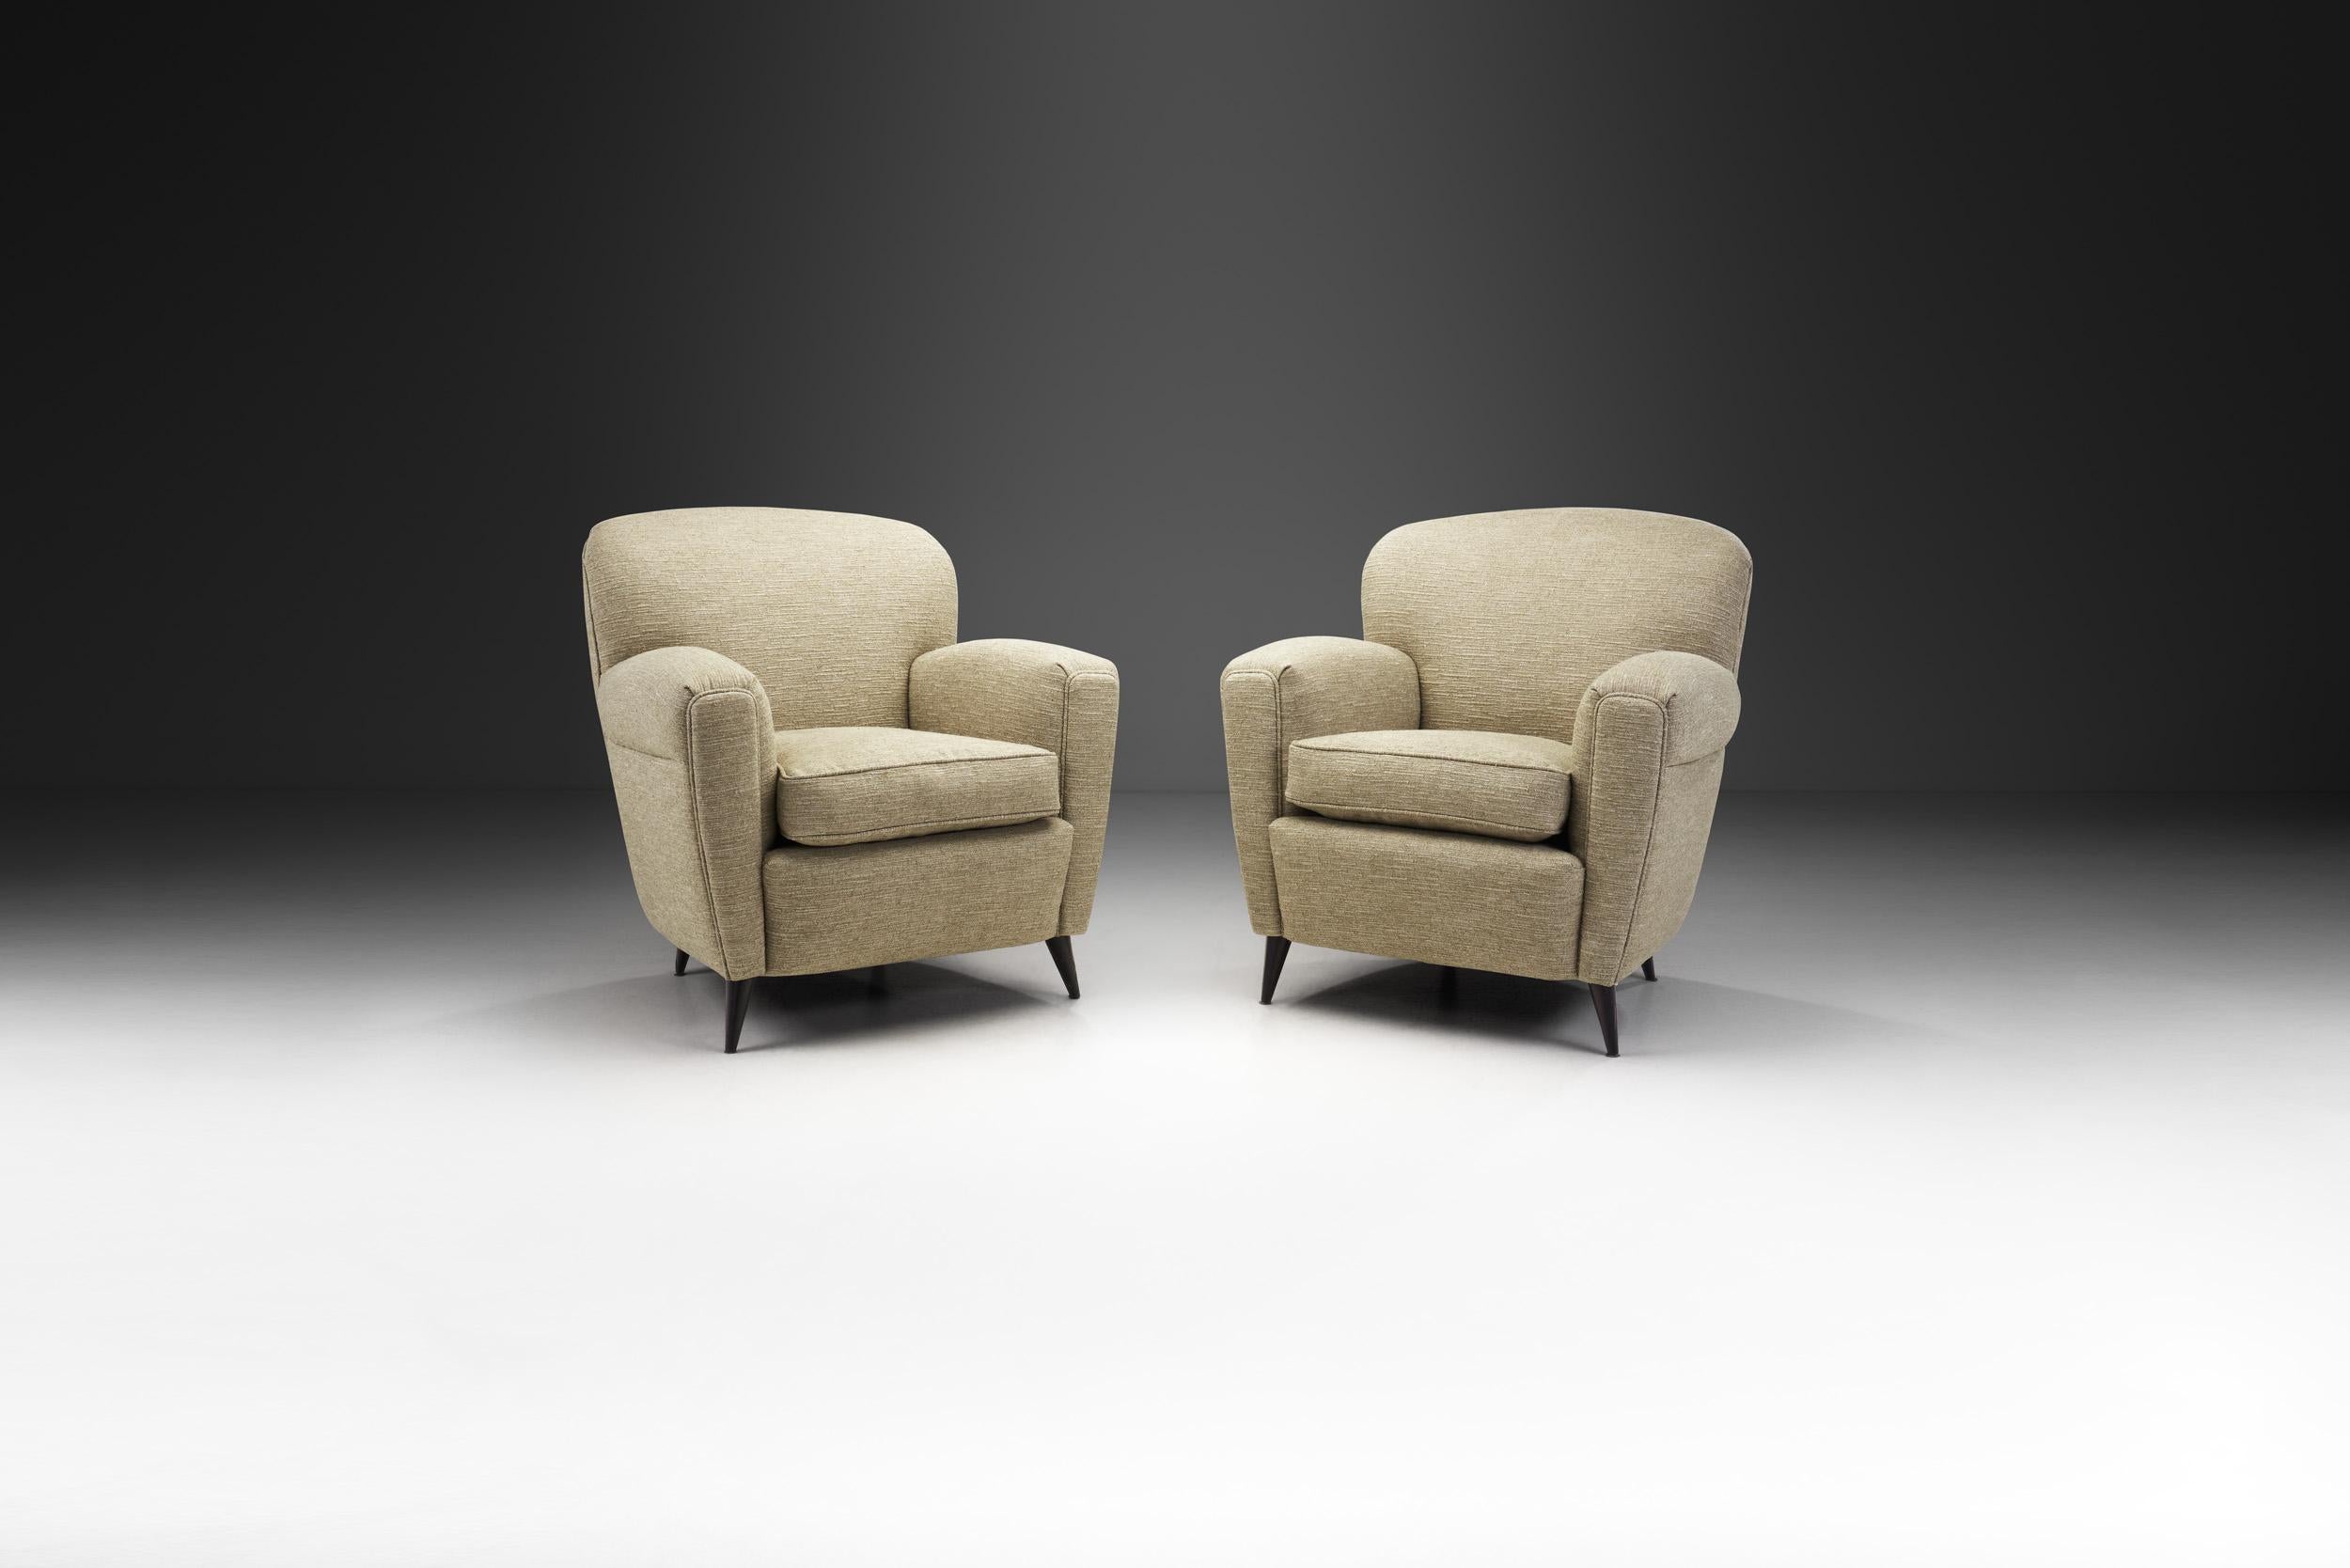 The Mid-Century Modern era is notable for its blending of Classic modern design elements with a slightly more updated feel. This beautiful pair of Italia lounge chairs has a Classic, comfortable style that is a prime example of the best qualities of